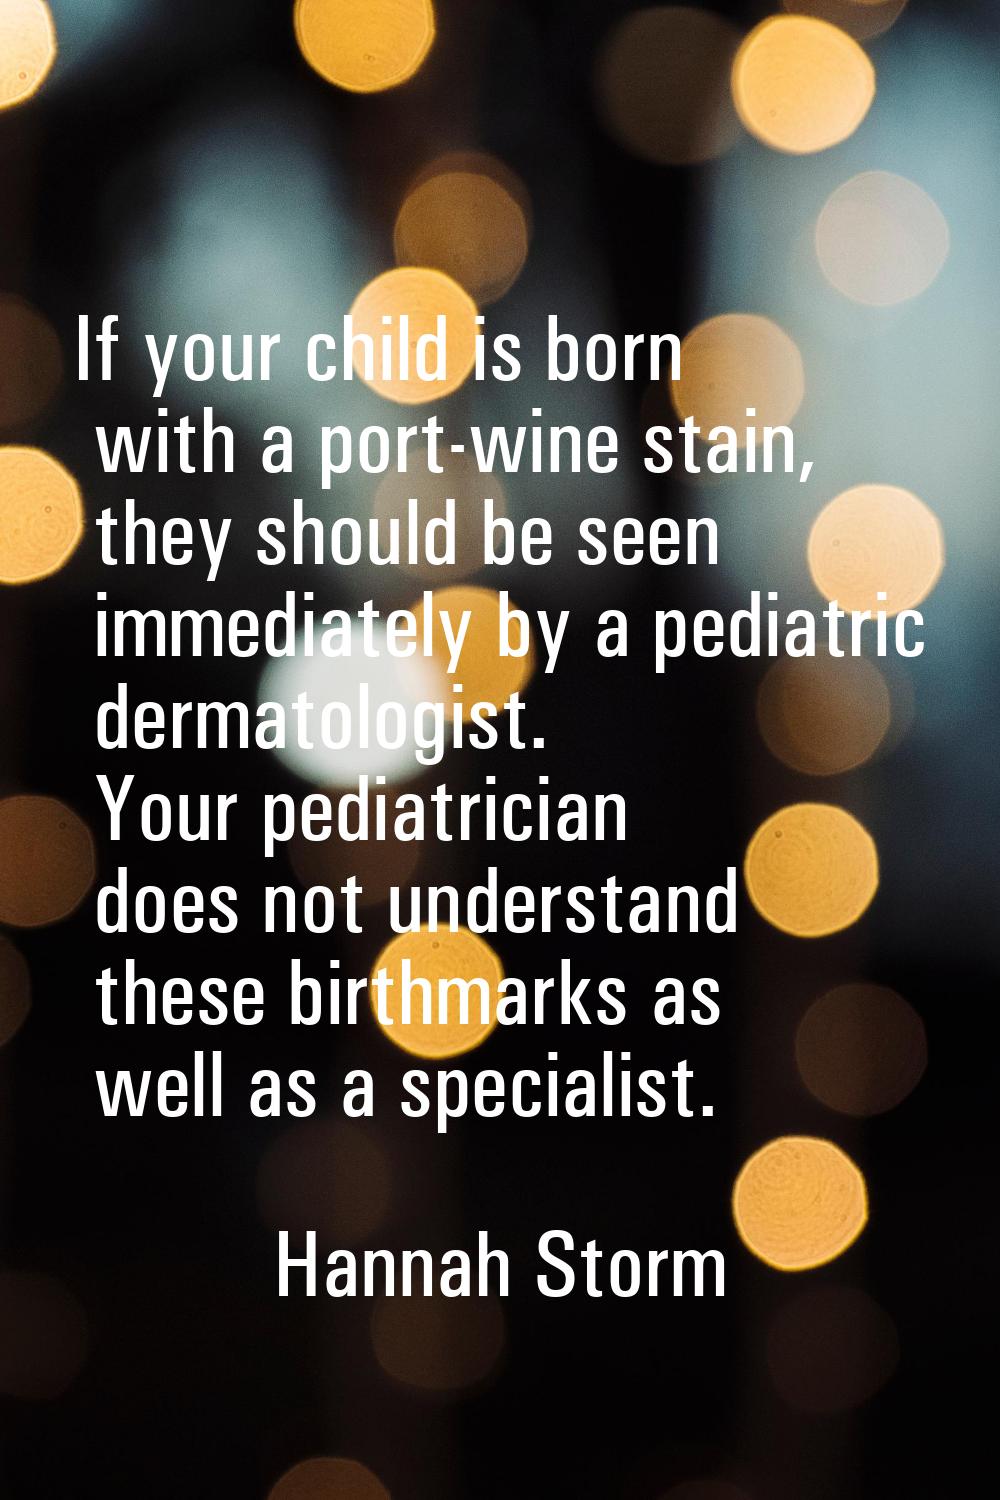 If your child is born with a port-wine stain, they should be seen immediately by a pediatric dermat